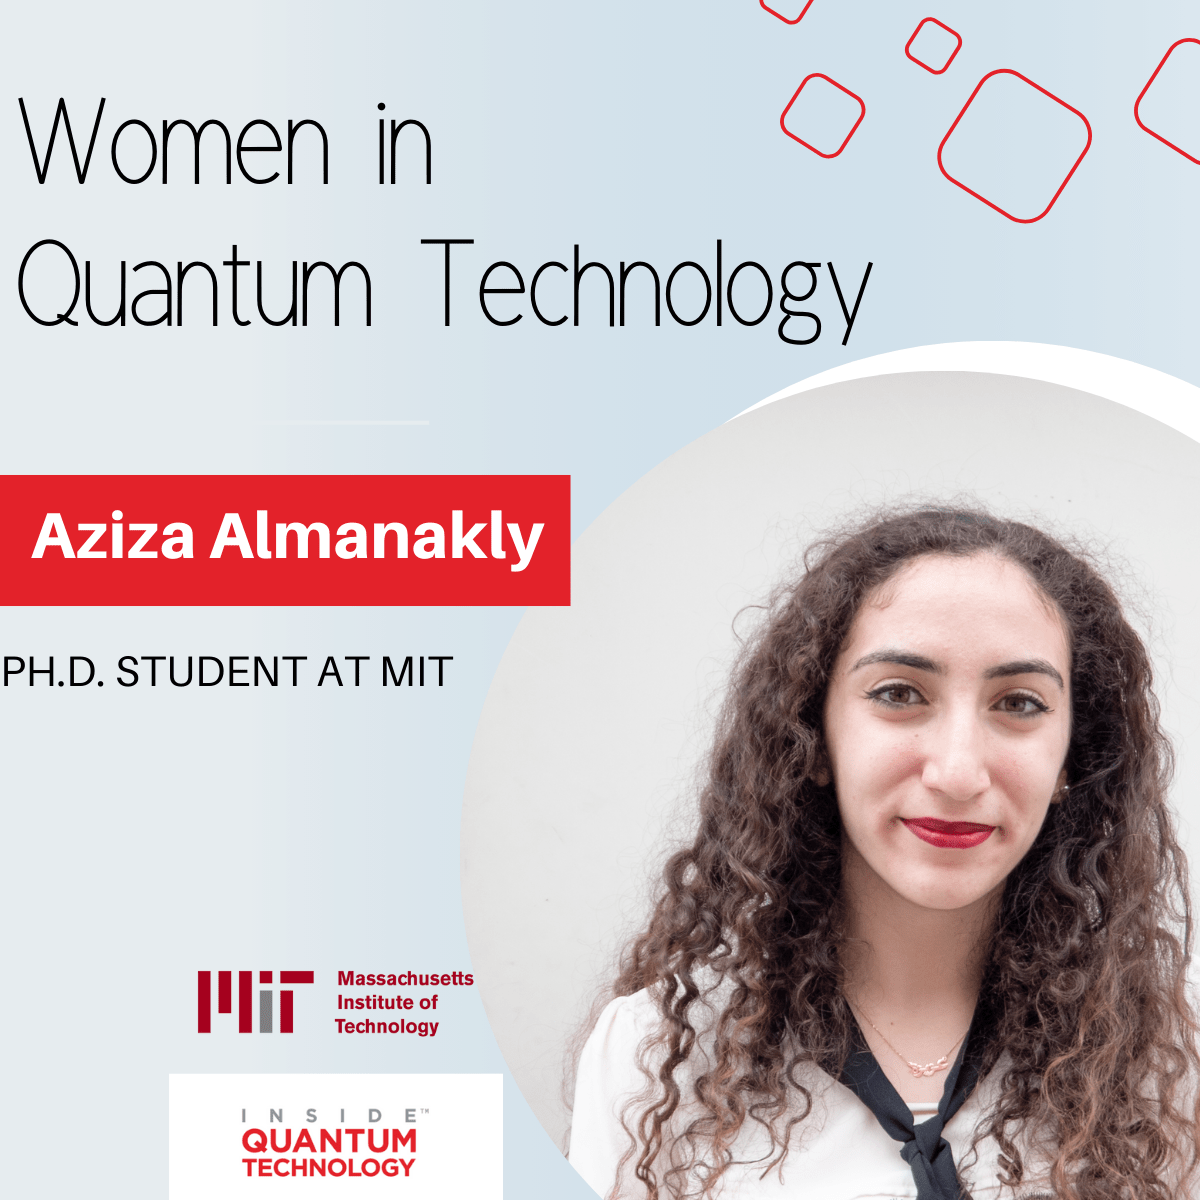 Aziza Almanakly, a graduate student at MIT, discusses her education and research in quantum computing and photonics.